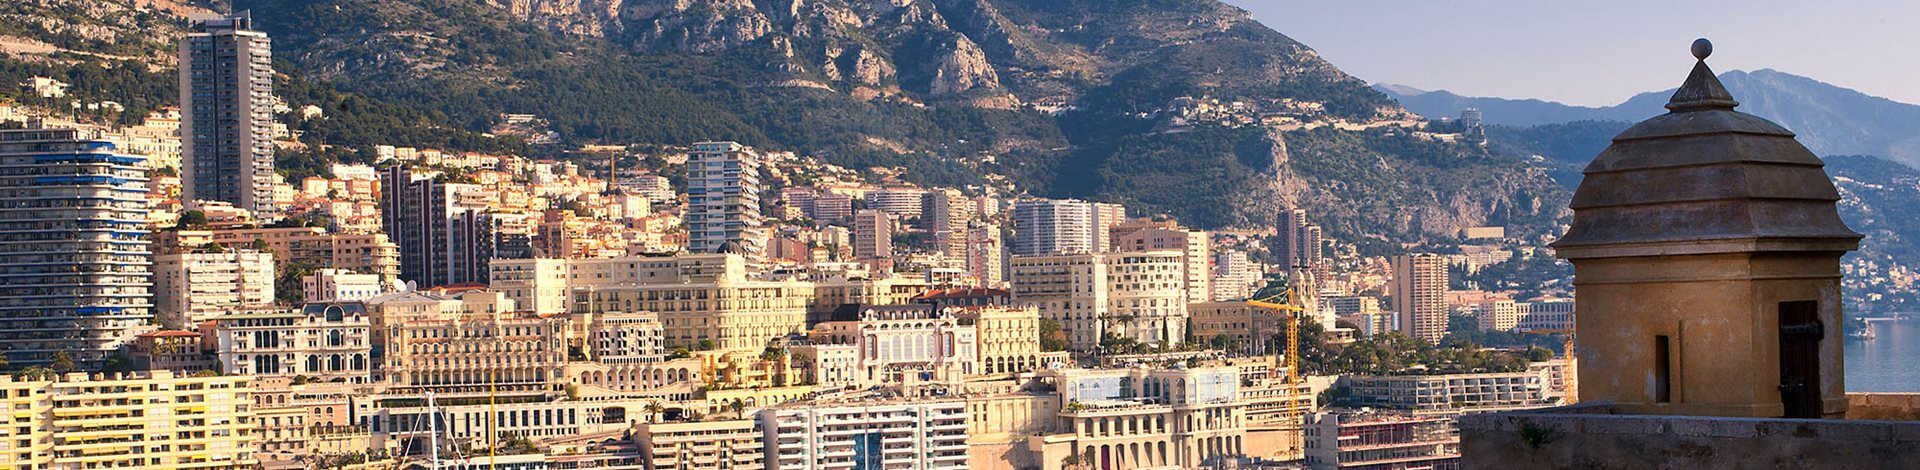 Harbour in Monaco with buildings and mountains in the background